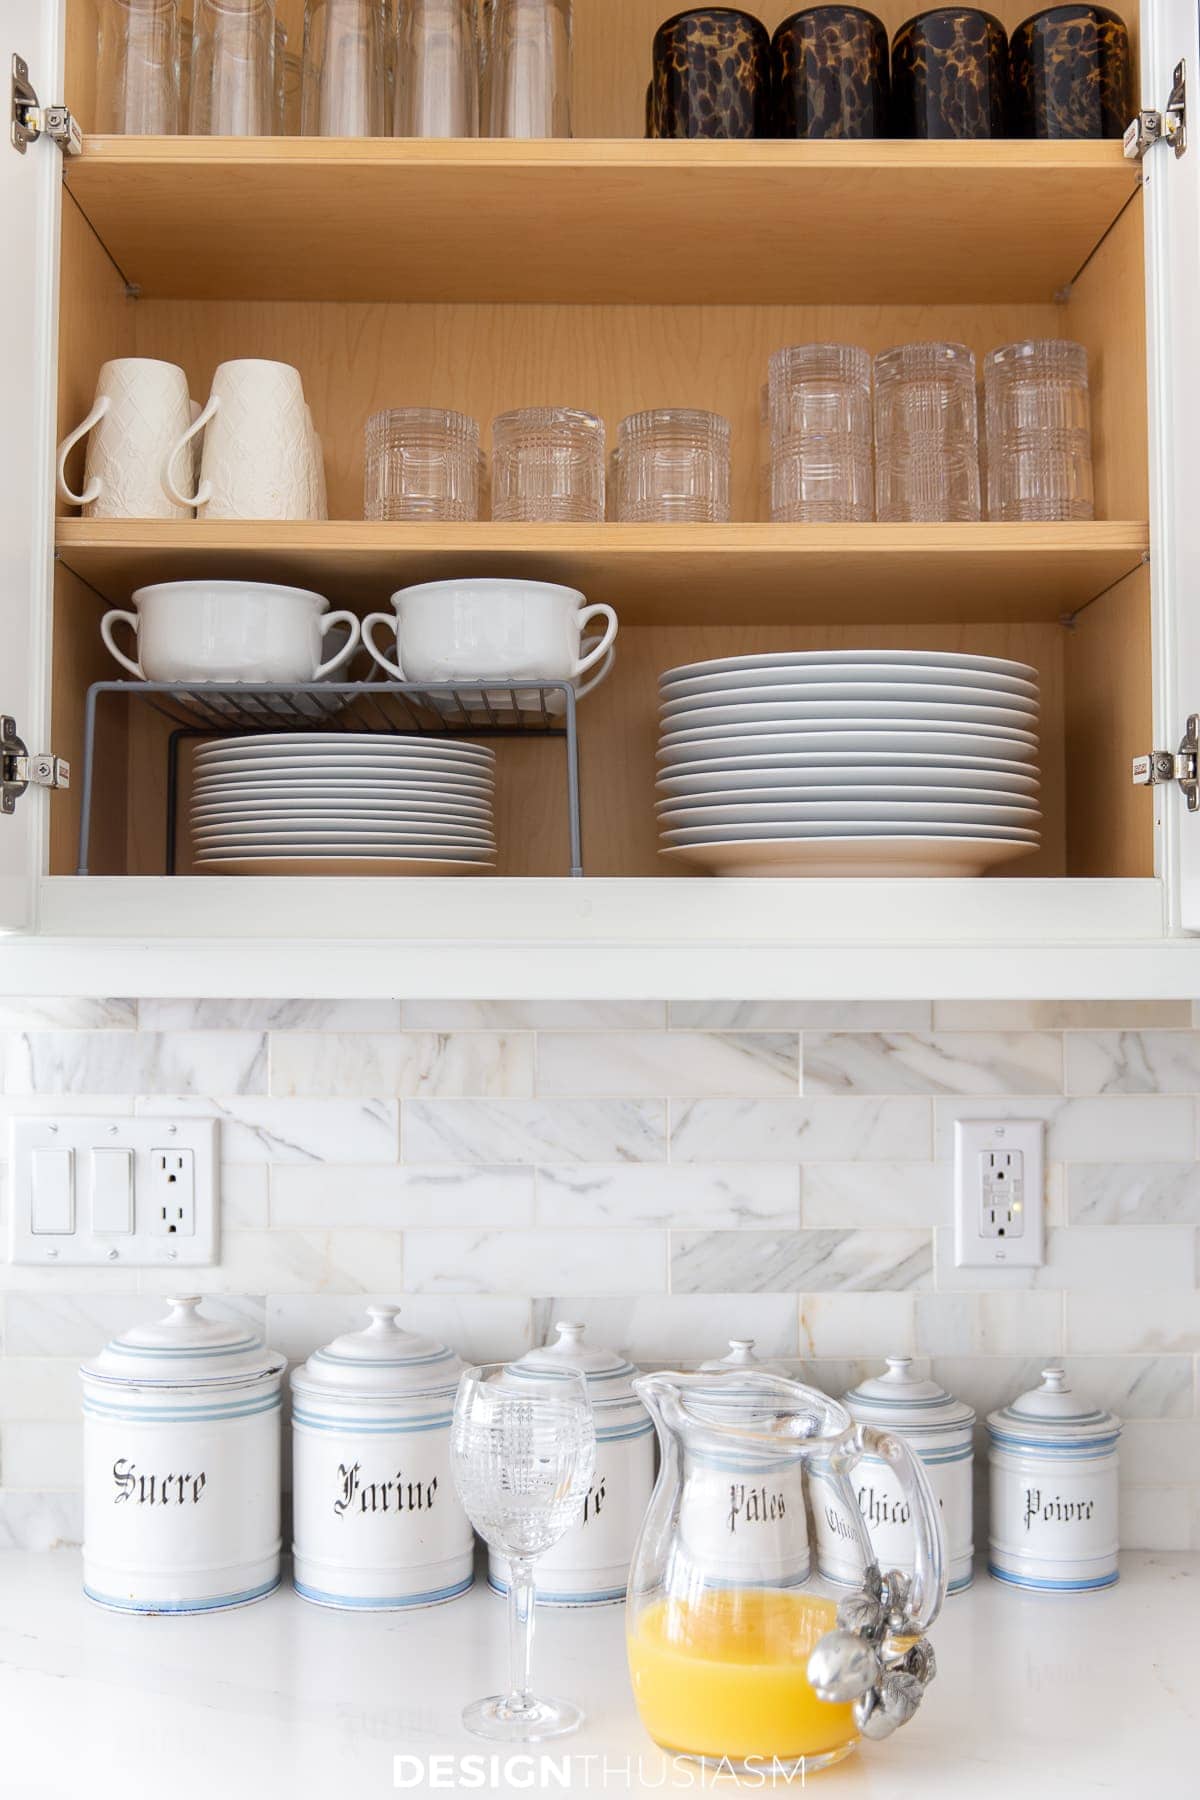 How to Clean and Organize Your Kitchen - Clean and Scentsible